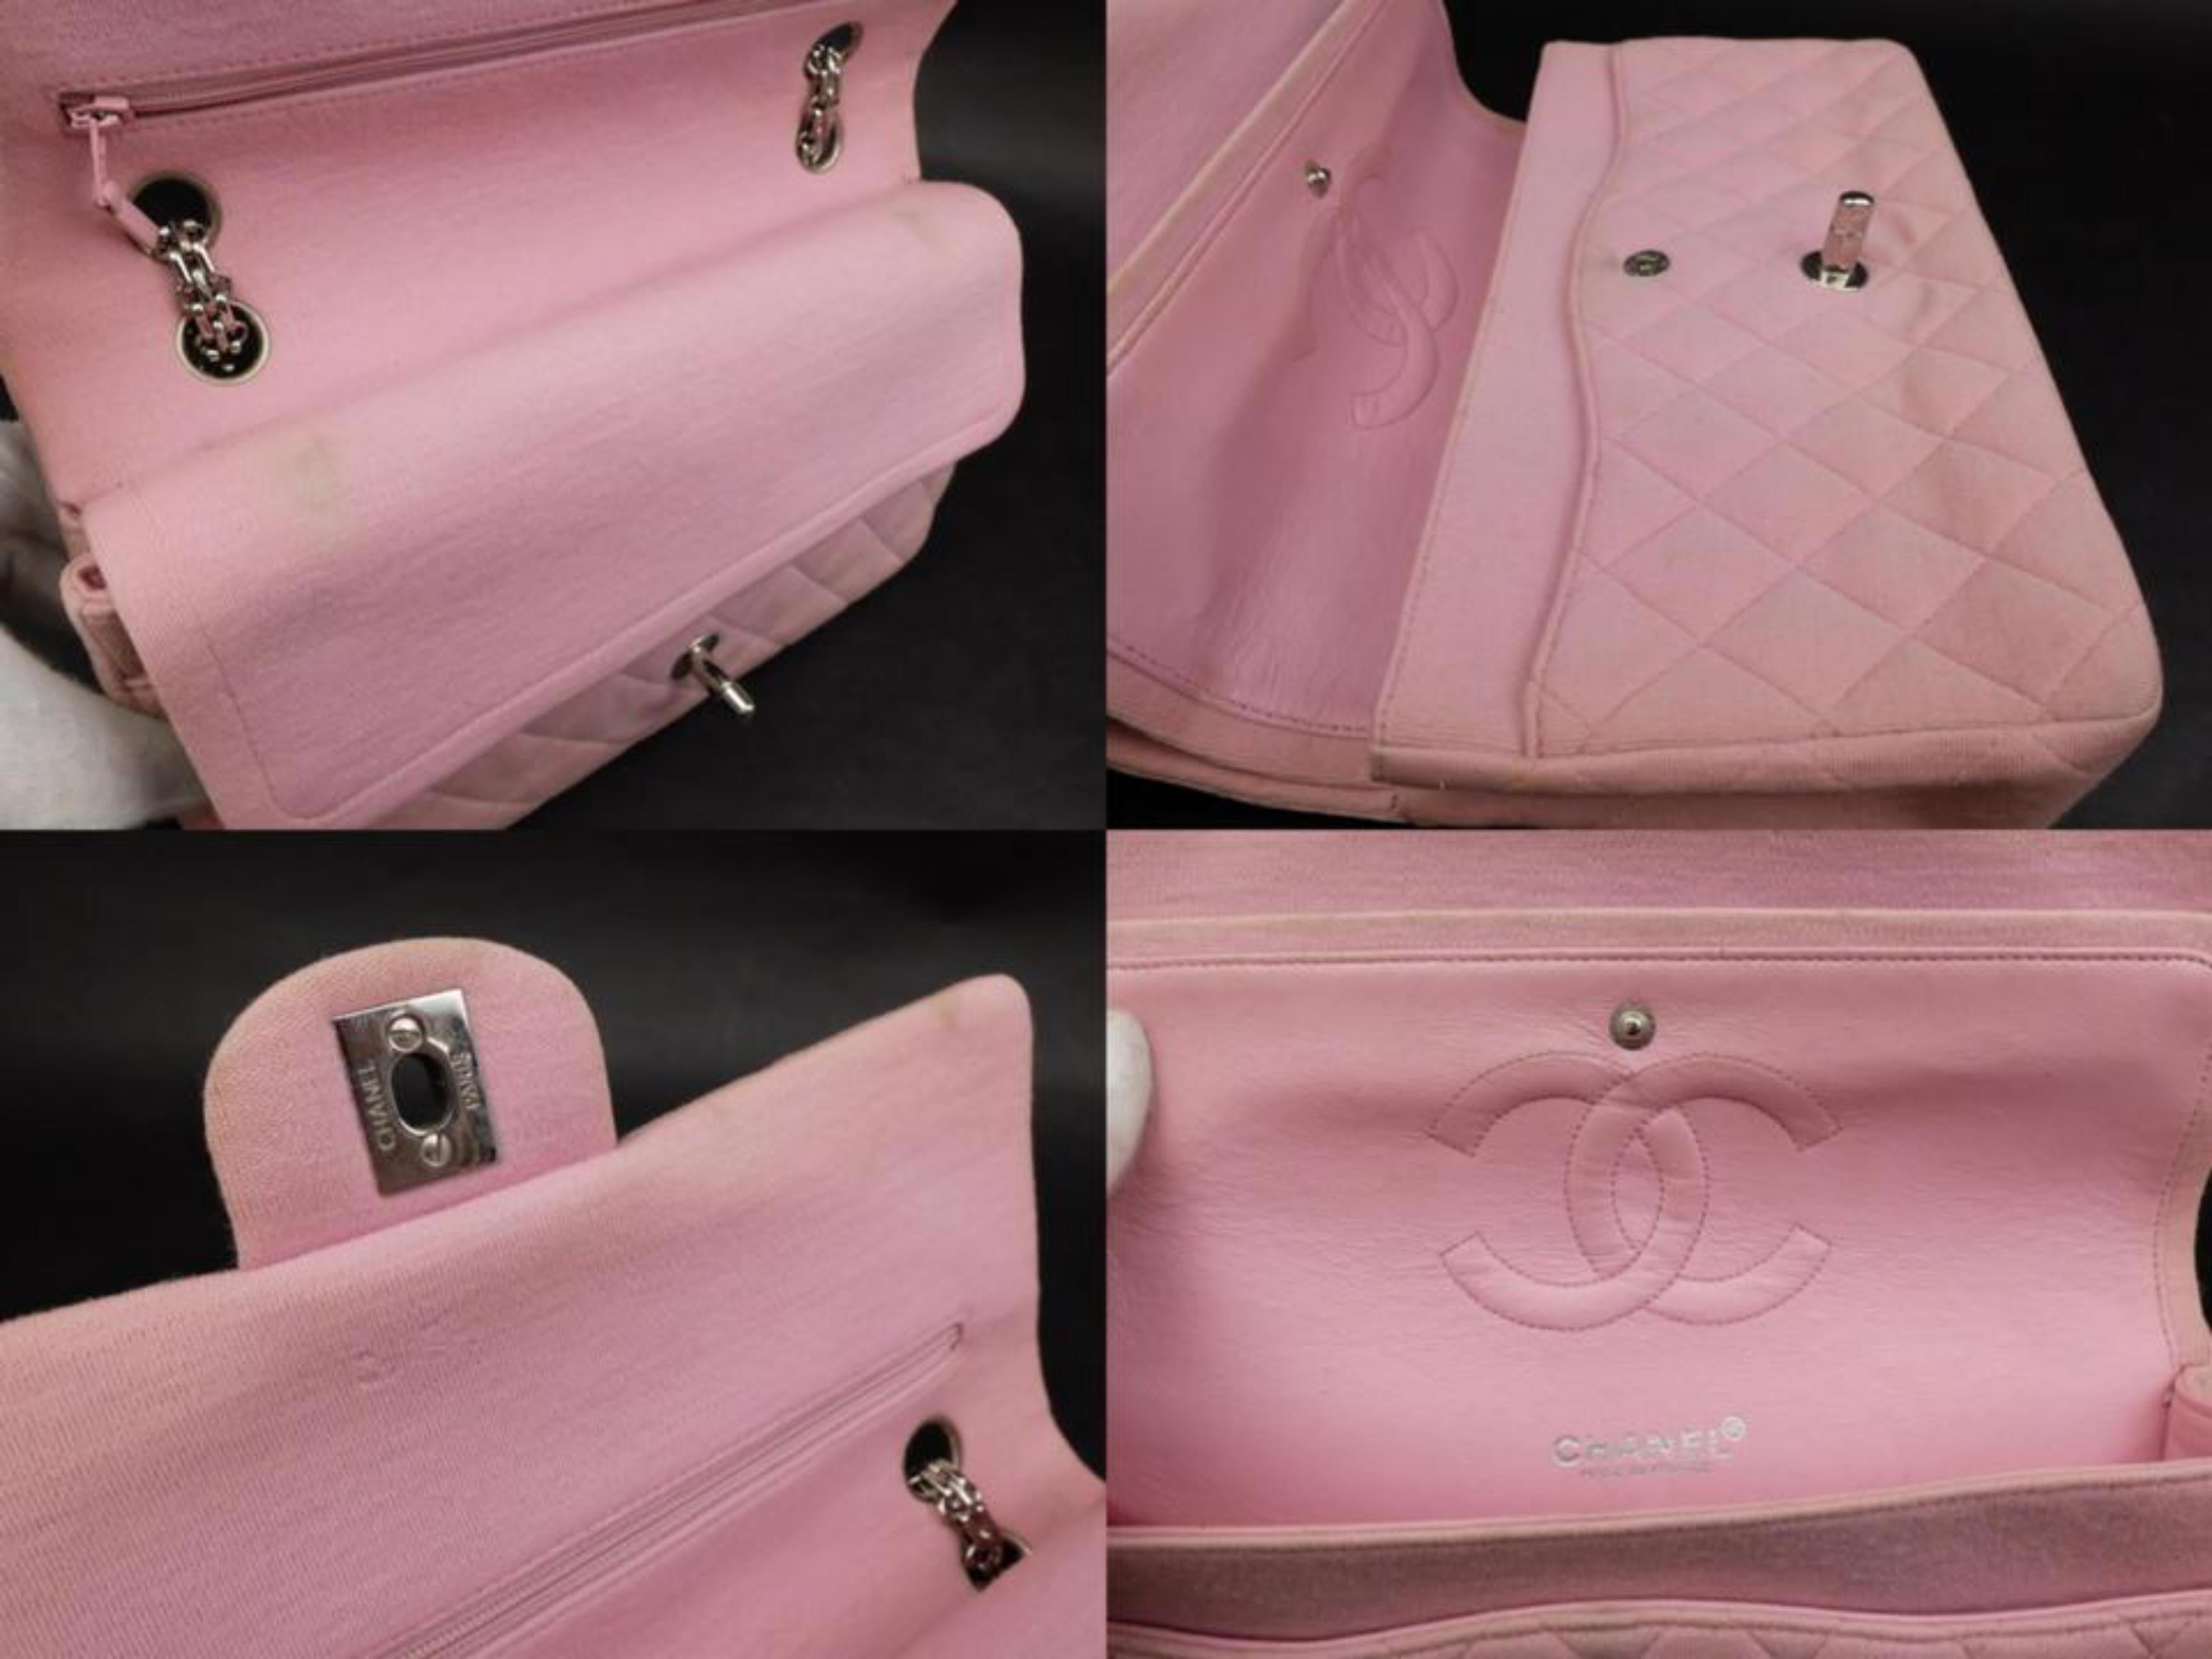 Chanel Mademoiselle Classic Flap Medium Quilted 231621 Pink Cotton Shoulder Bag In Fair Condition For Sale In Forest Hills, NY